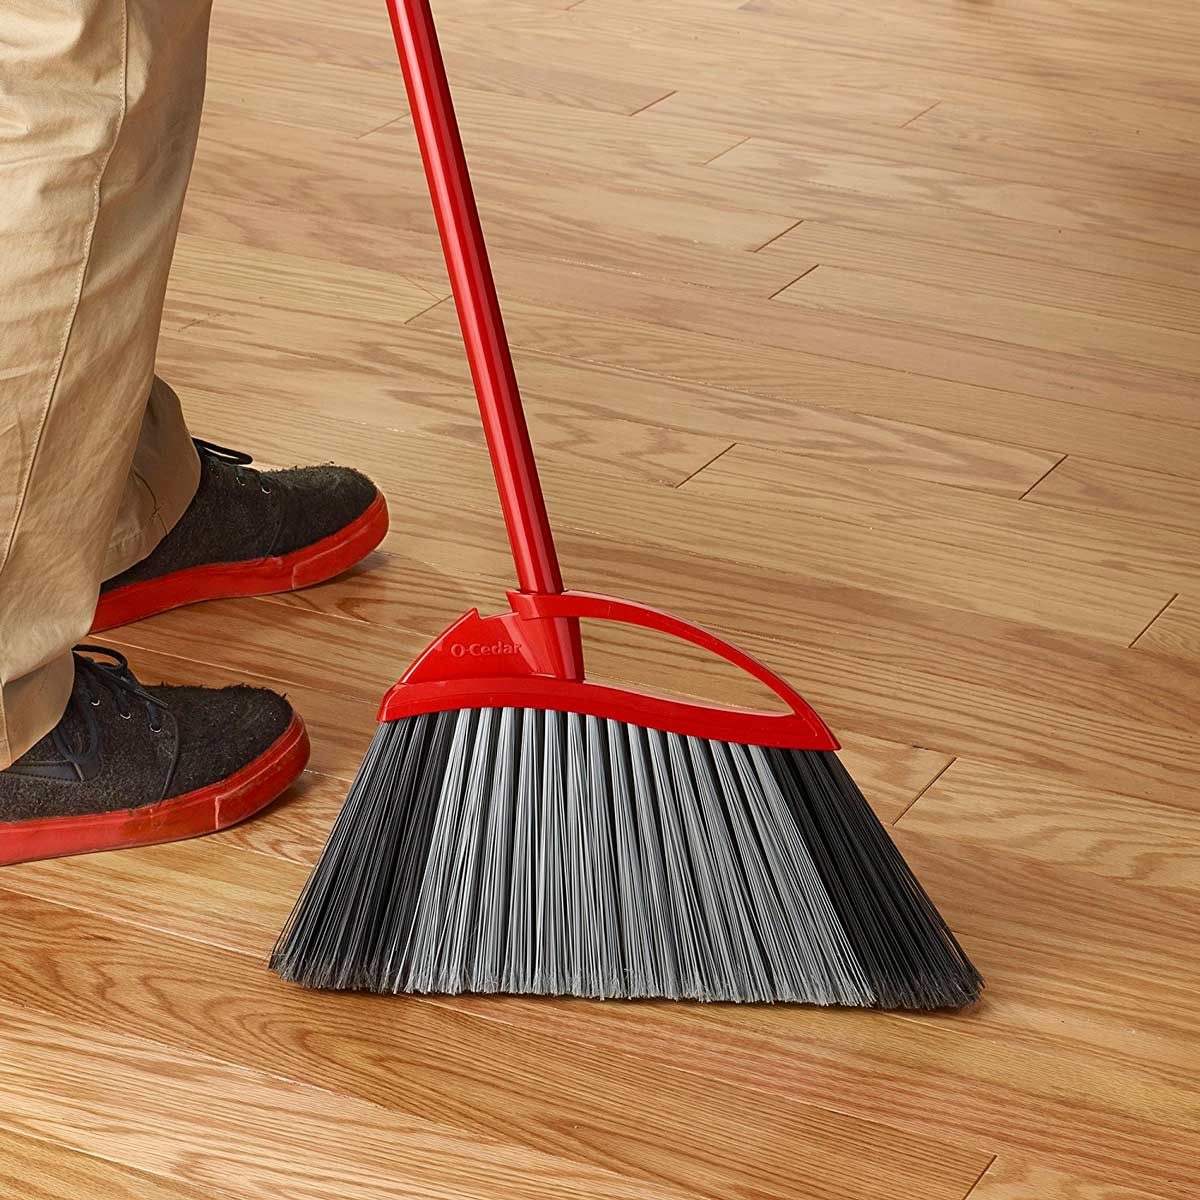 How to Clean Your Broom